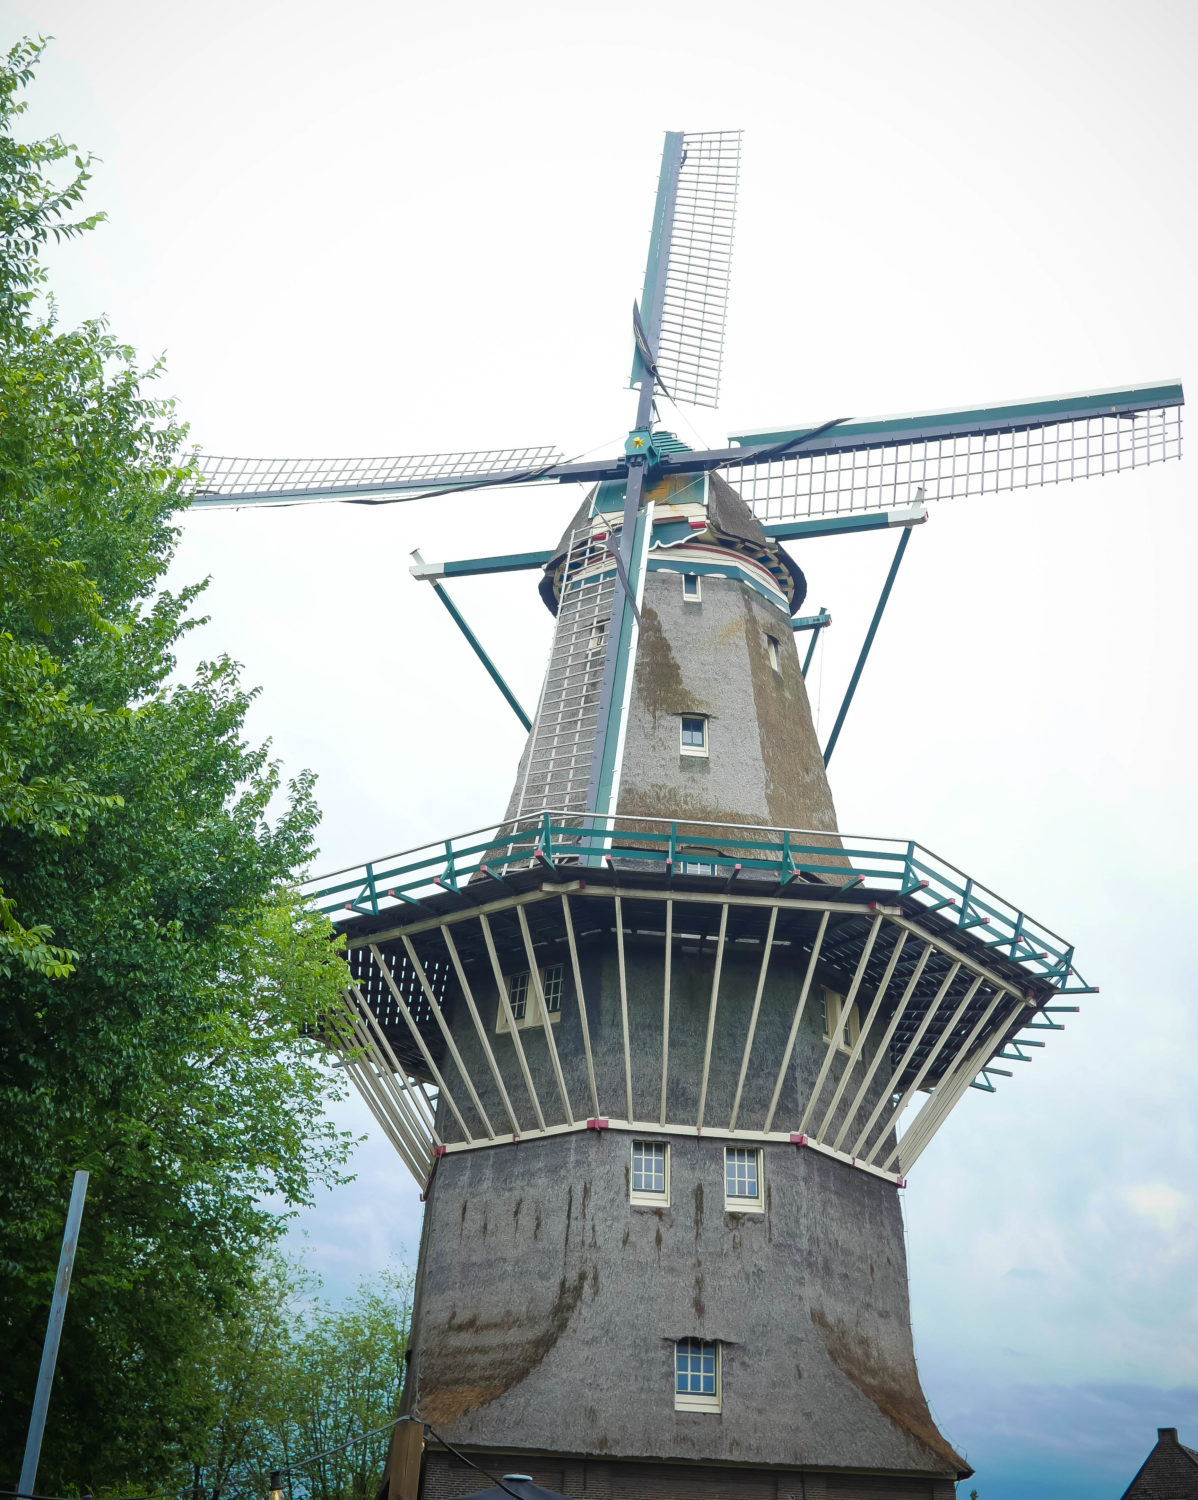 Amsterdam is famous for a large number of mills, they have become a symbol of the city. People visiting Amsterdam for tourism should see them.